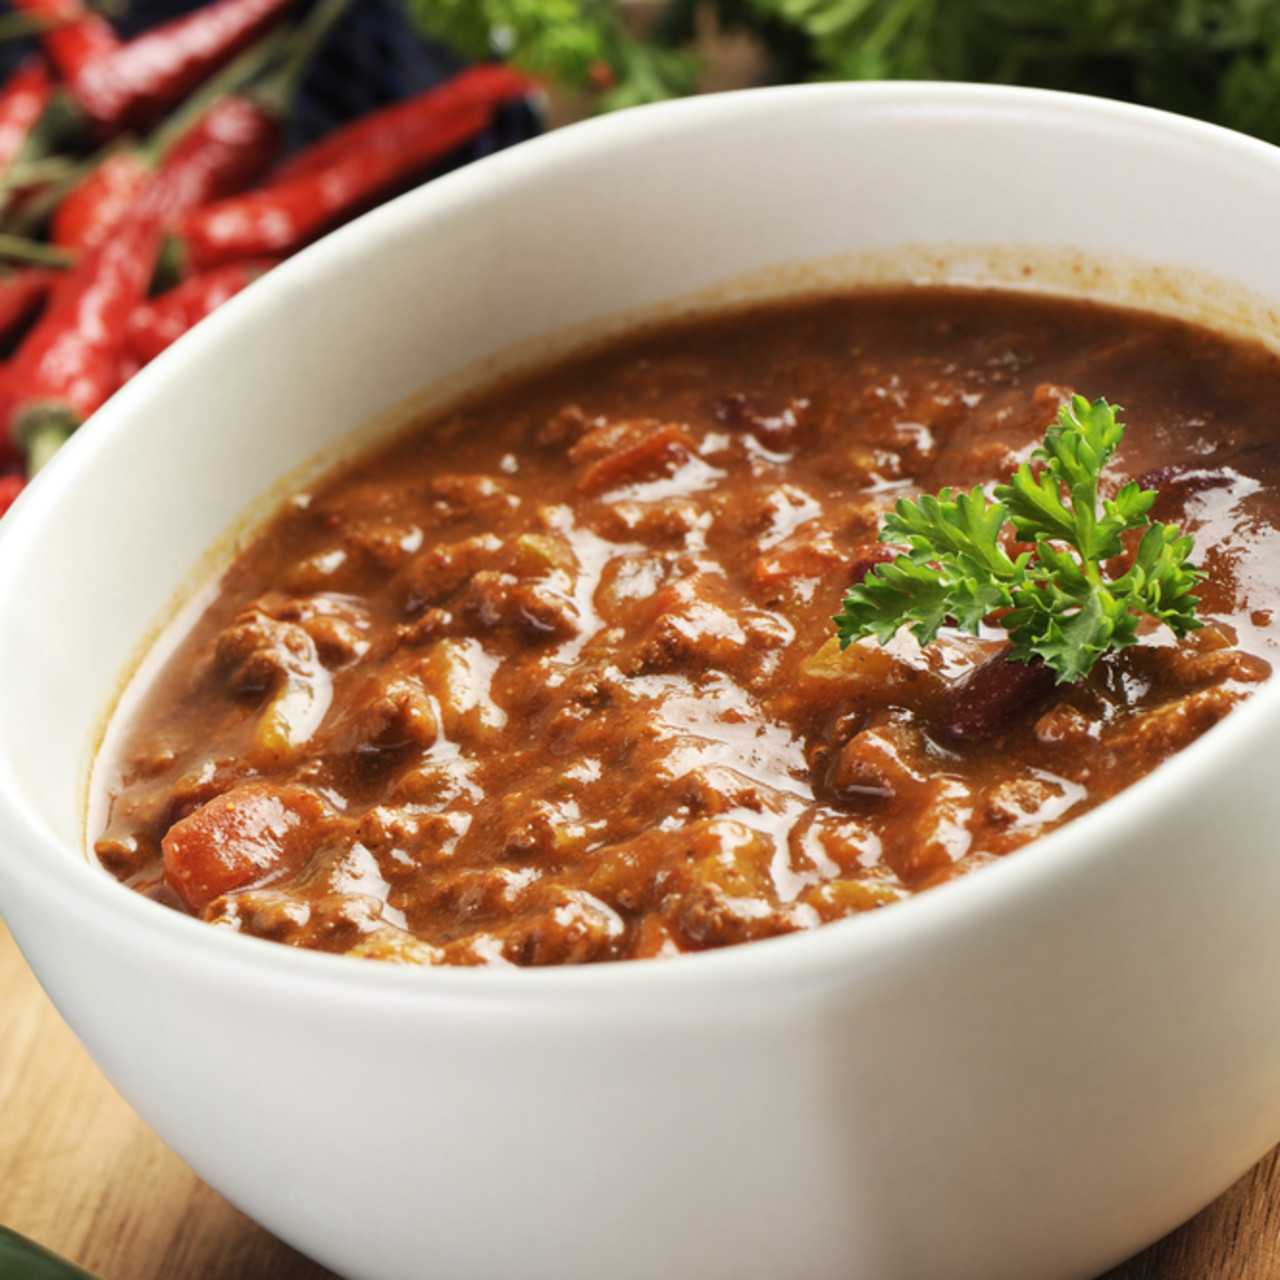 Recipes for Chili Beans with Ground Beef Fresh Beef Chili with Beans